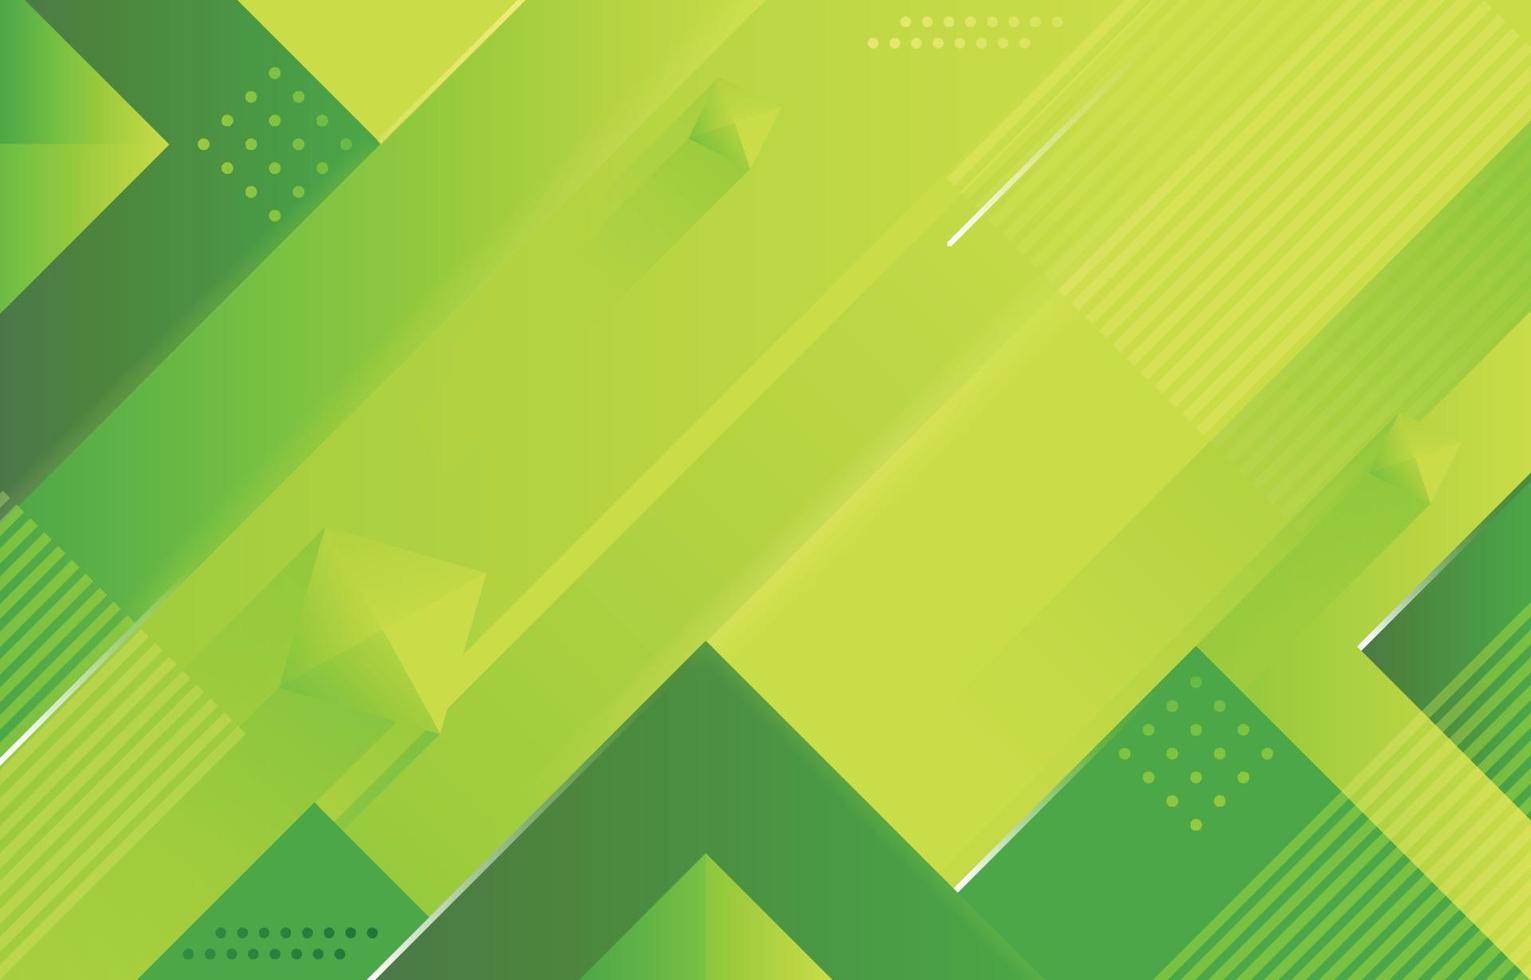 Geometric Shapes Background in Green vector